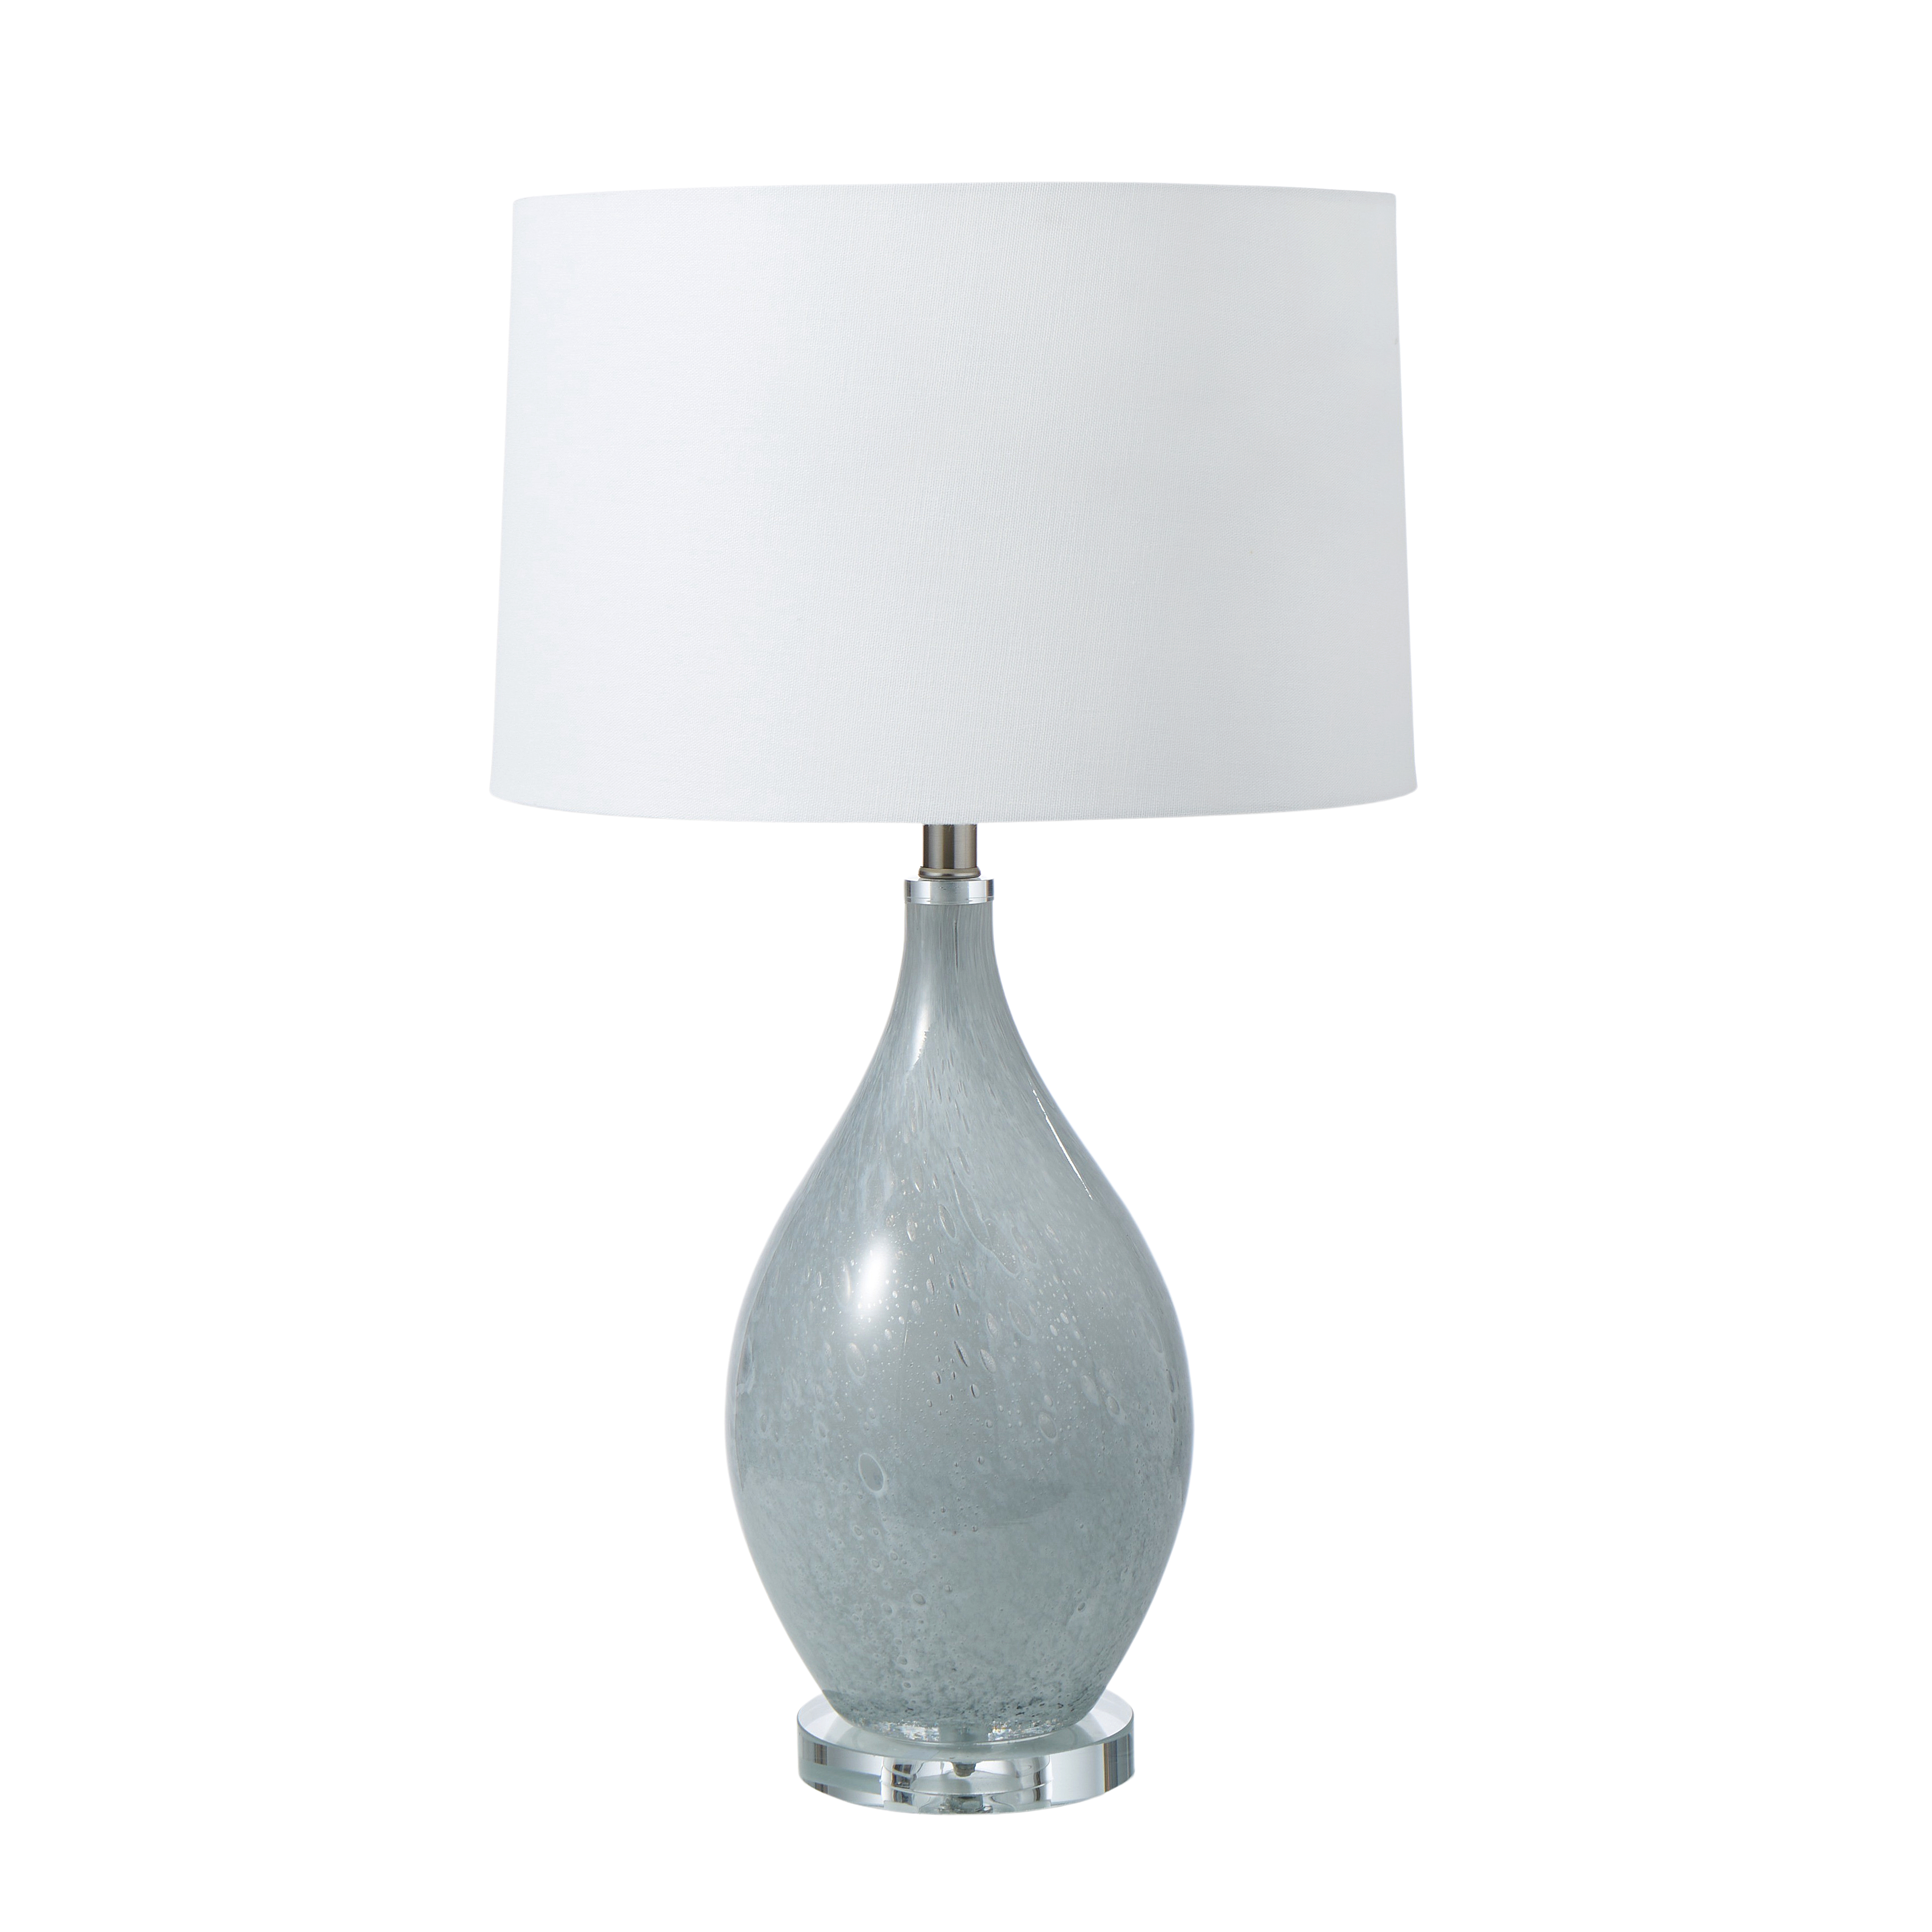 Society Home Opaque Glass Lamp Bright Light Home Decor Bedside Study Room White